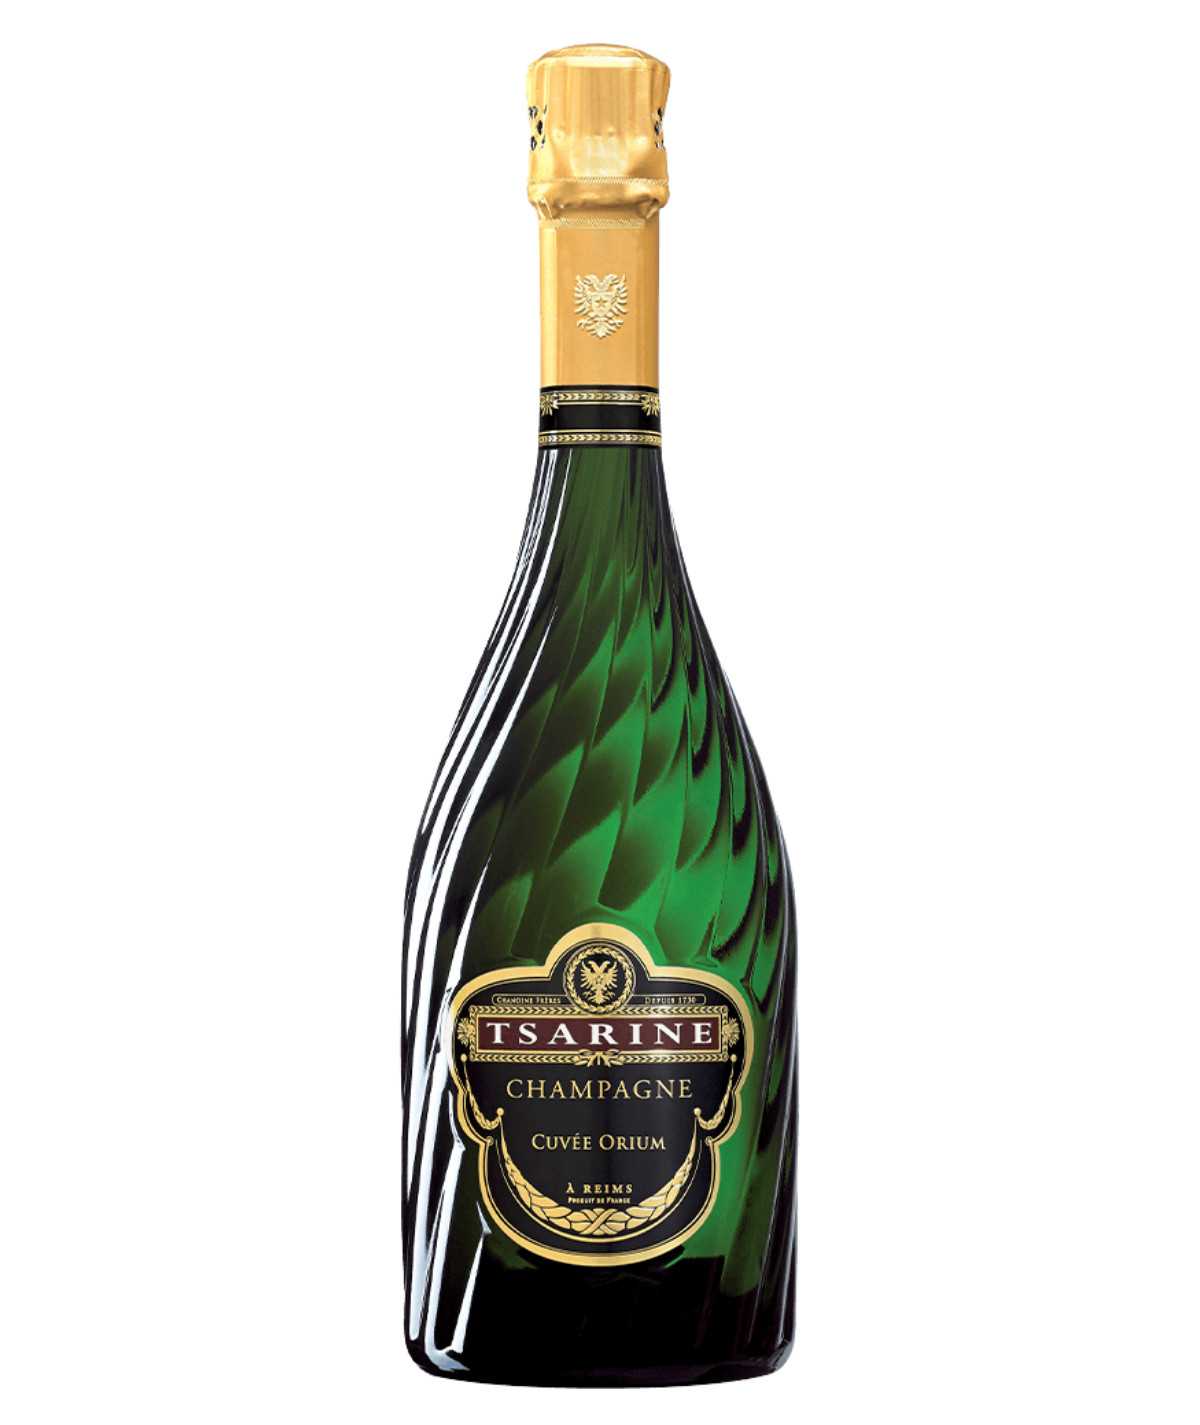 Champagne Tsarine Cuvée Orium - Elegance and finesse in a bottle adorned with a golden label.